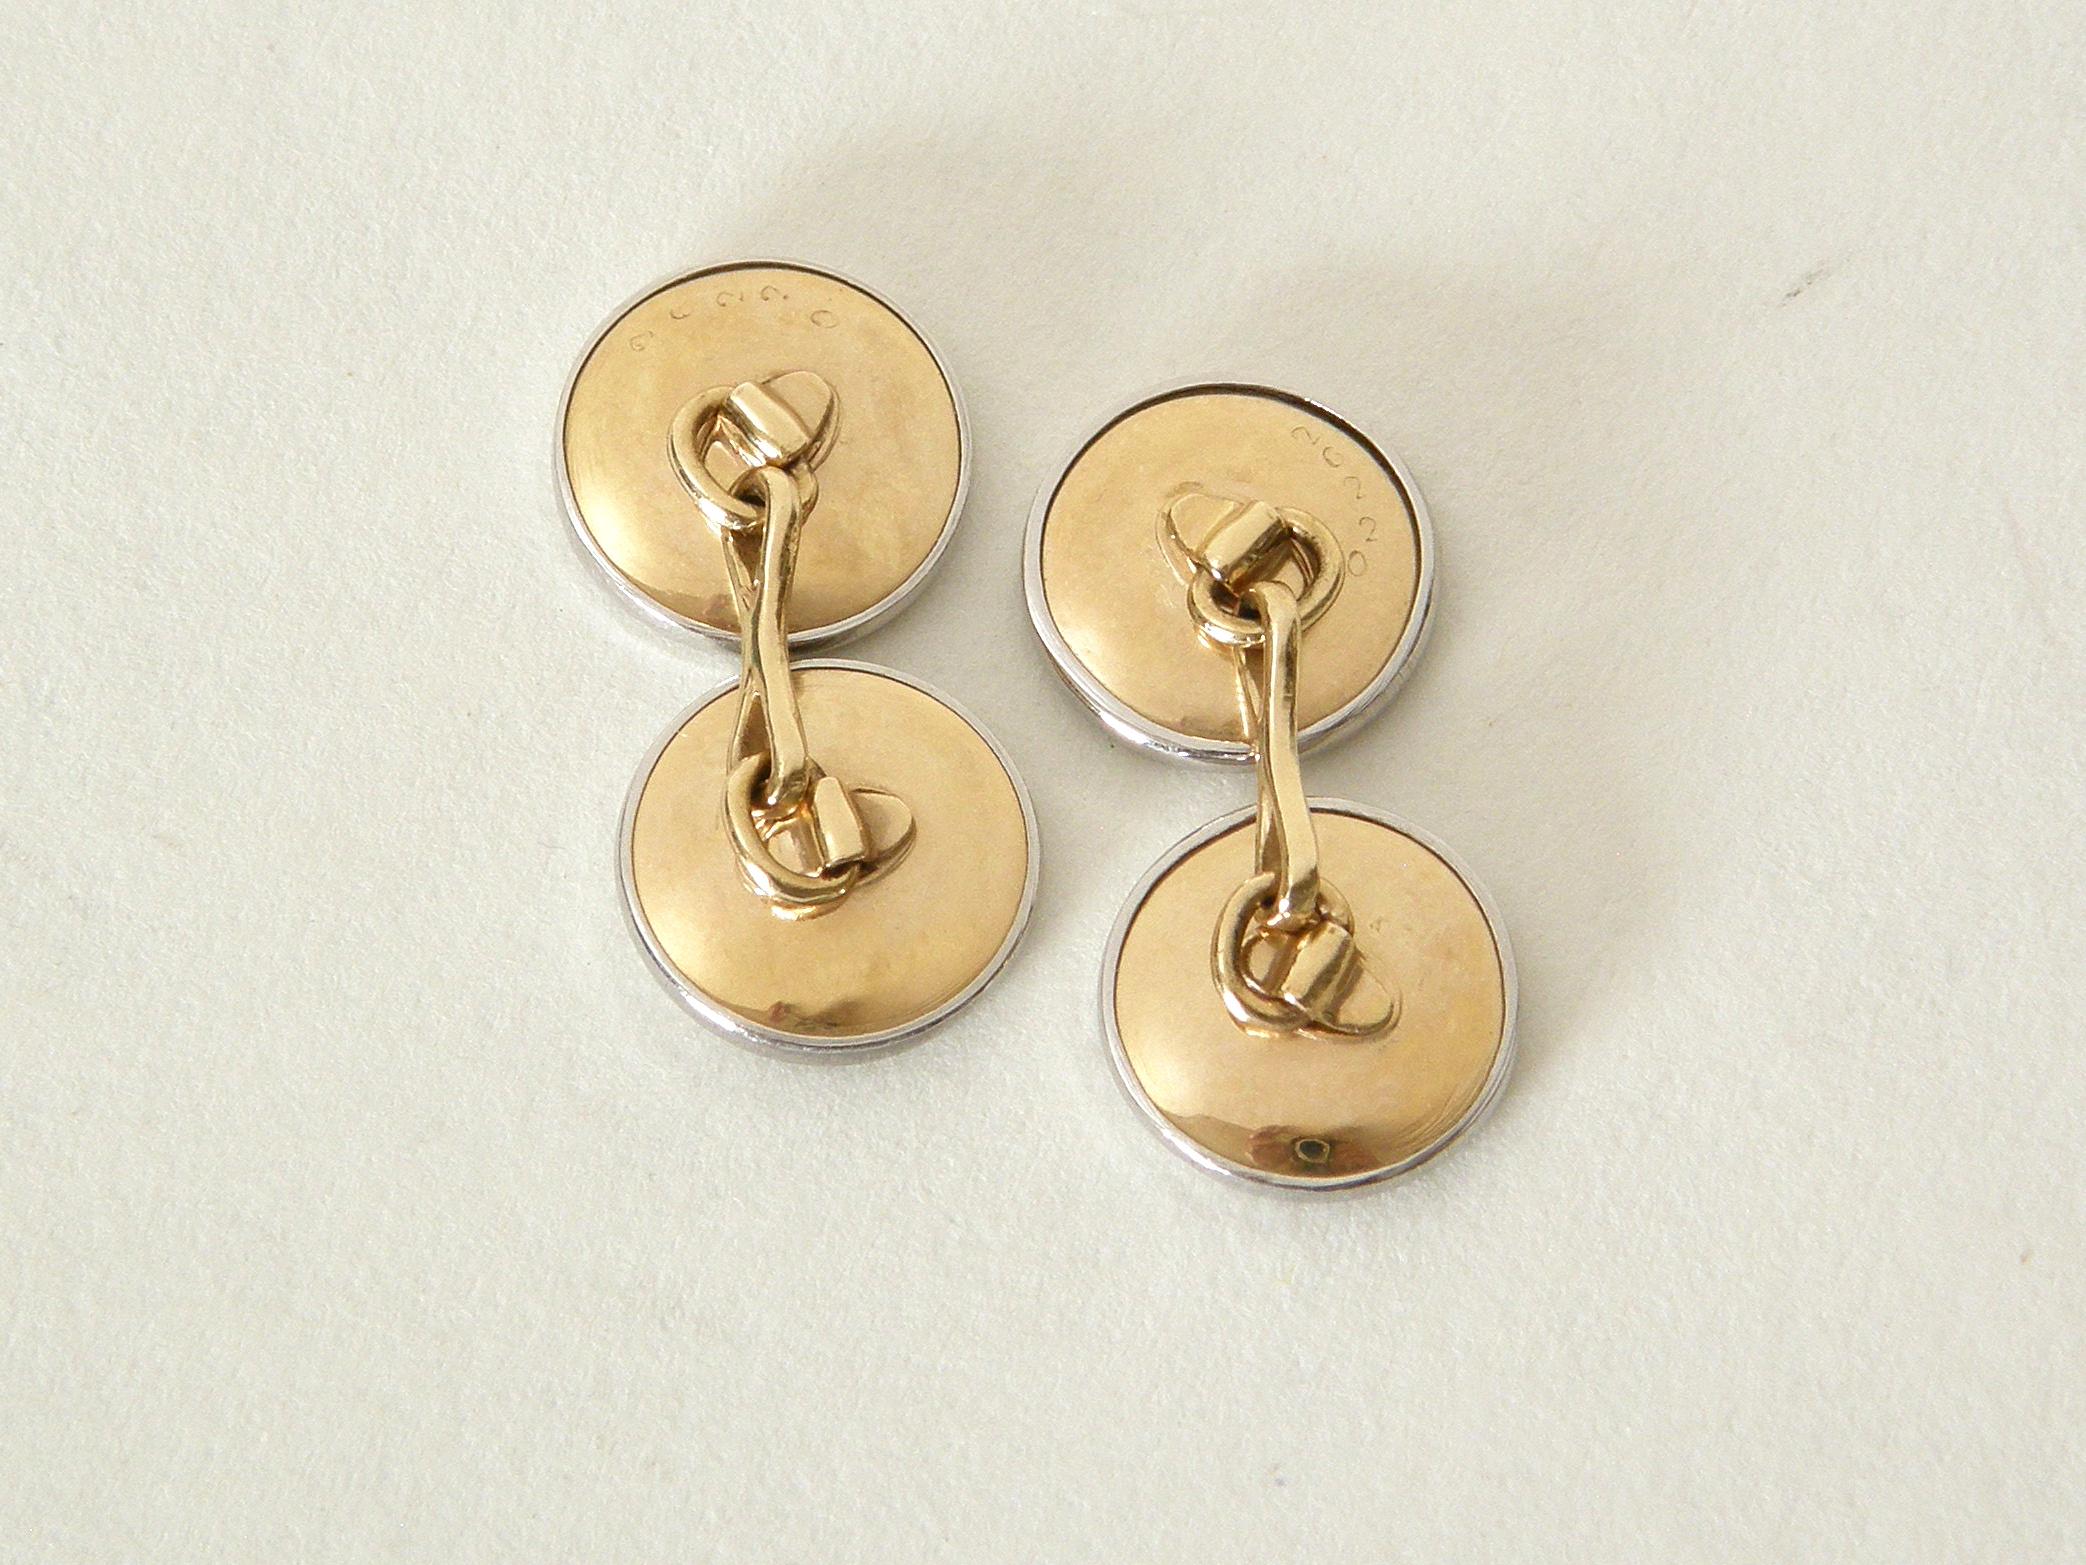 Cartier 14K Gold Cufflinks and Studs Set with Mother of Pearl by Larter and Sons 1